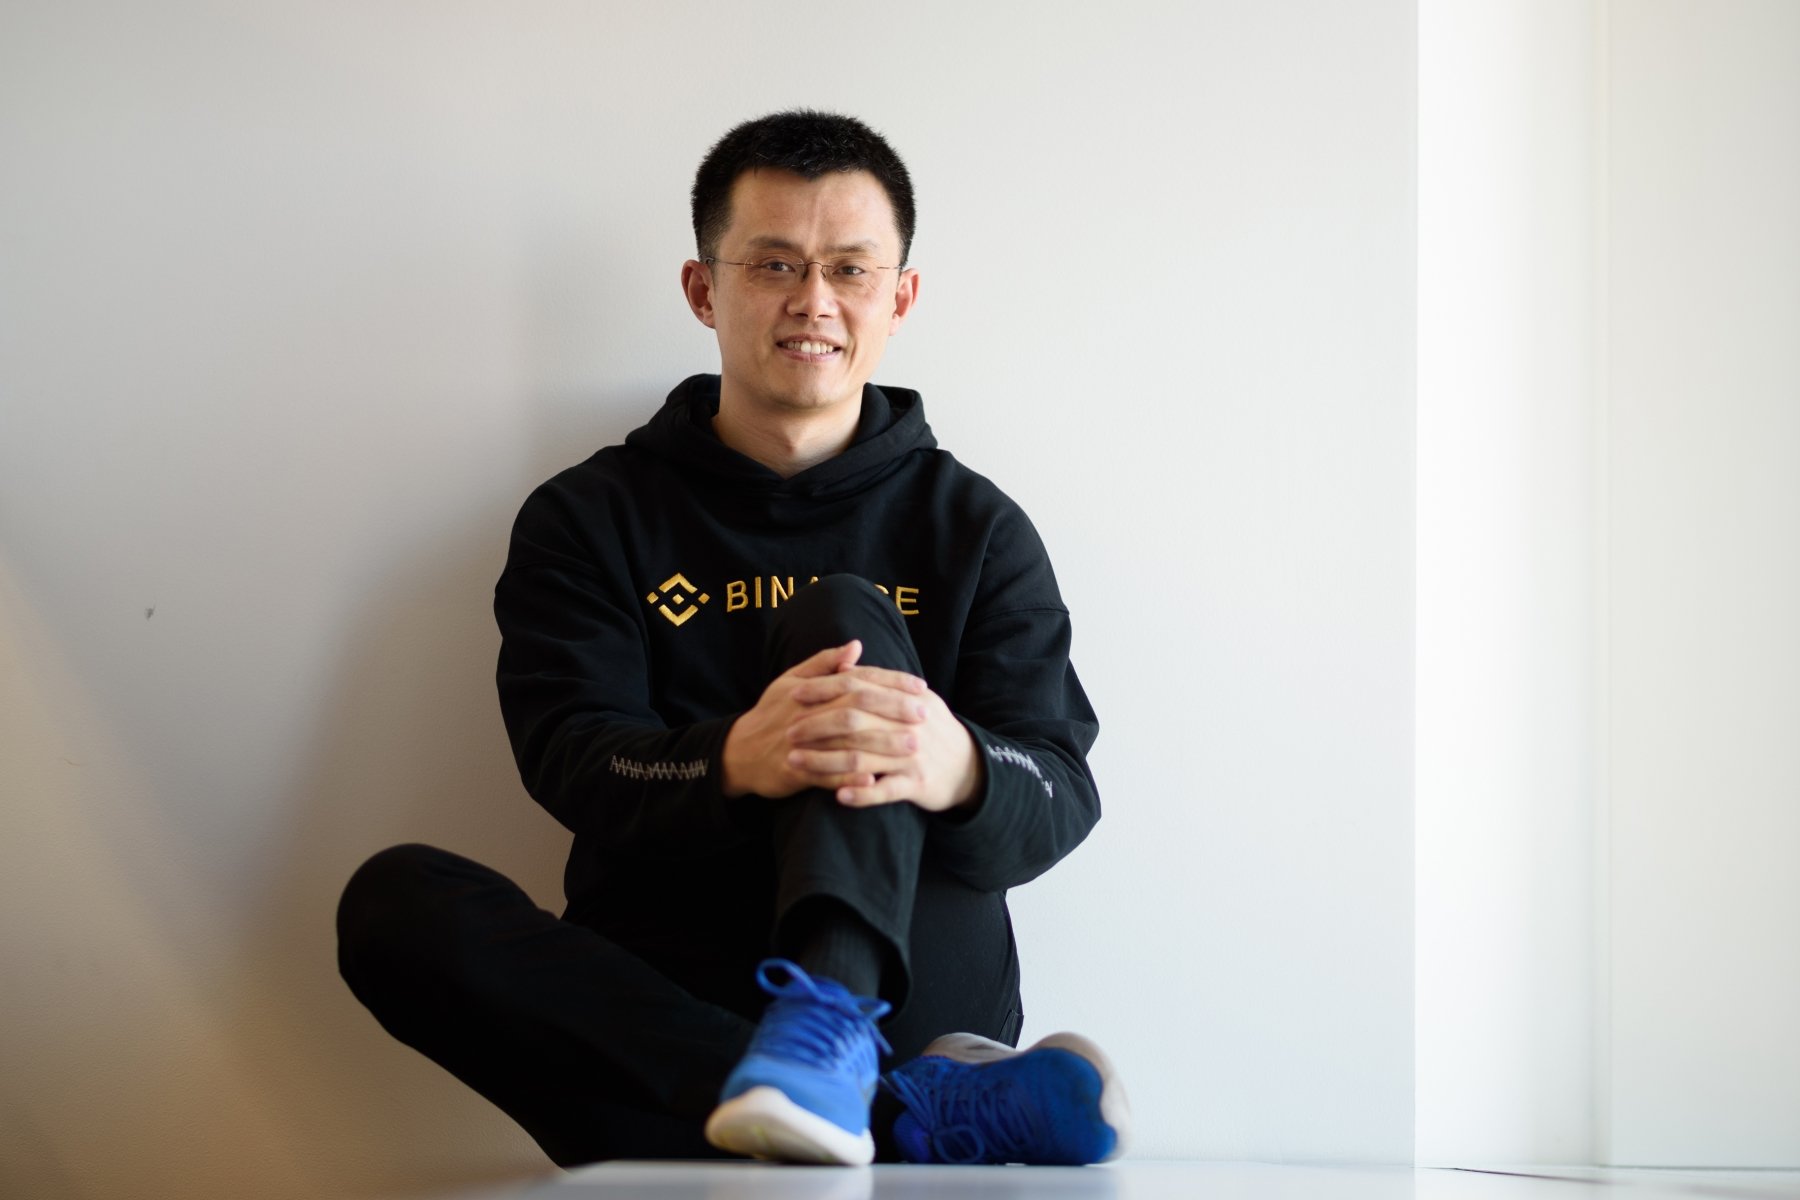 Binance Rejects Charges of Embezzlement, Shares Its Side of Story